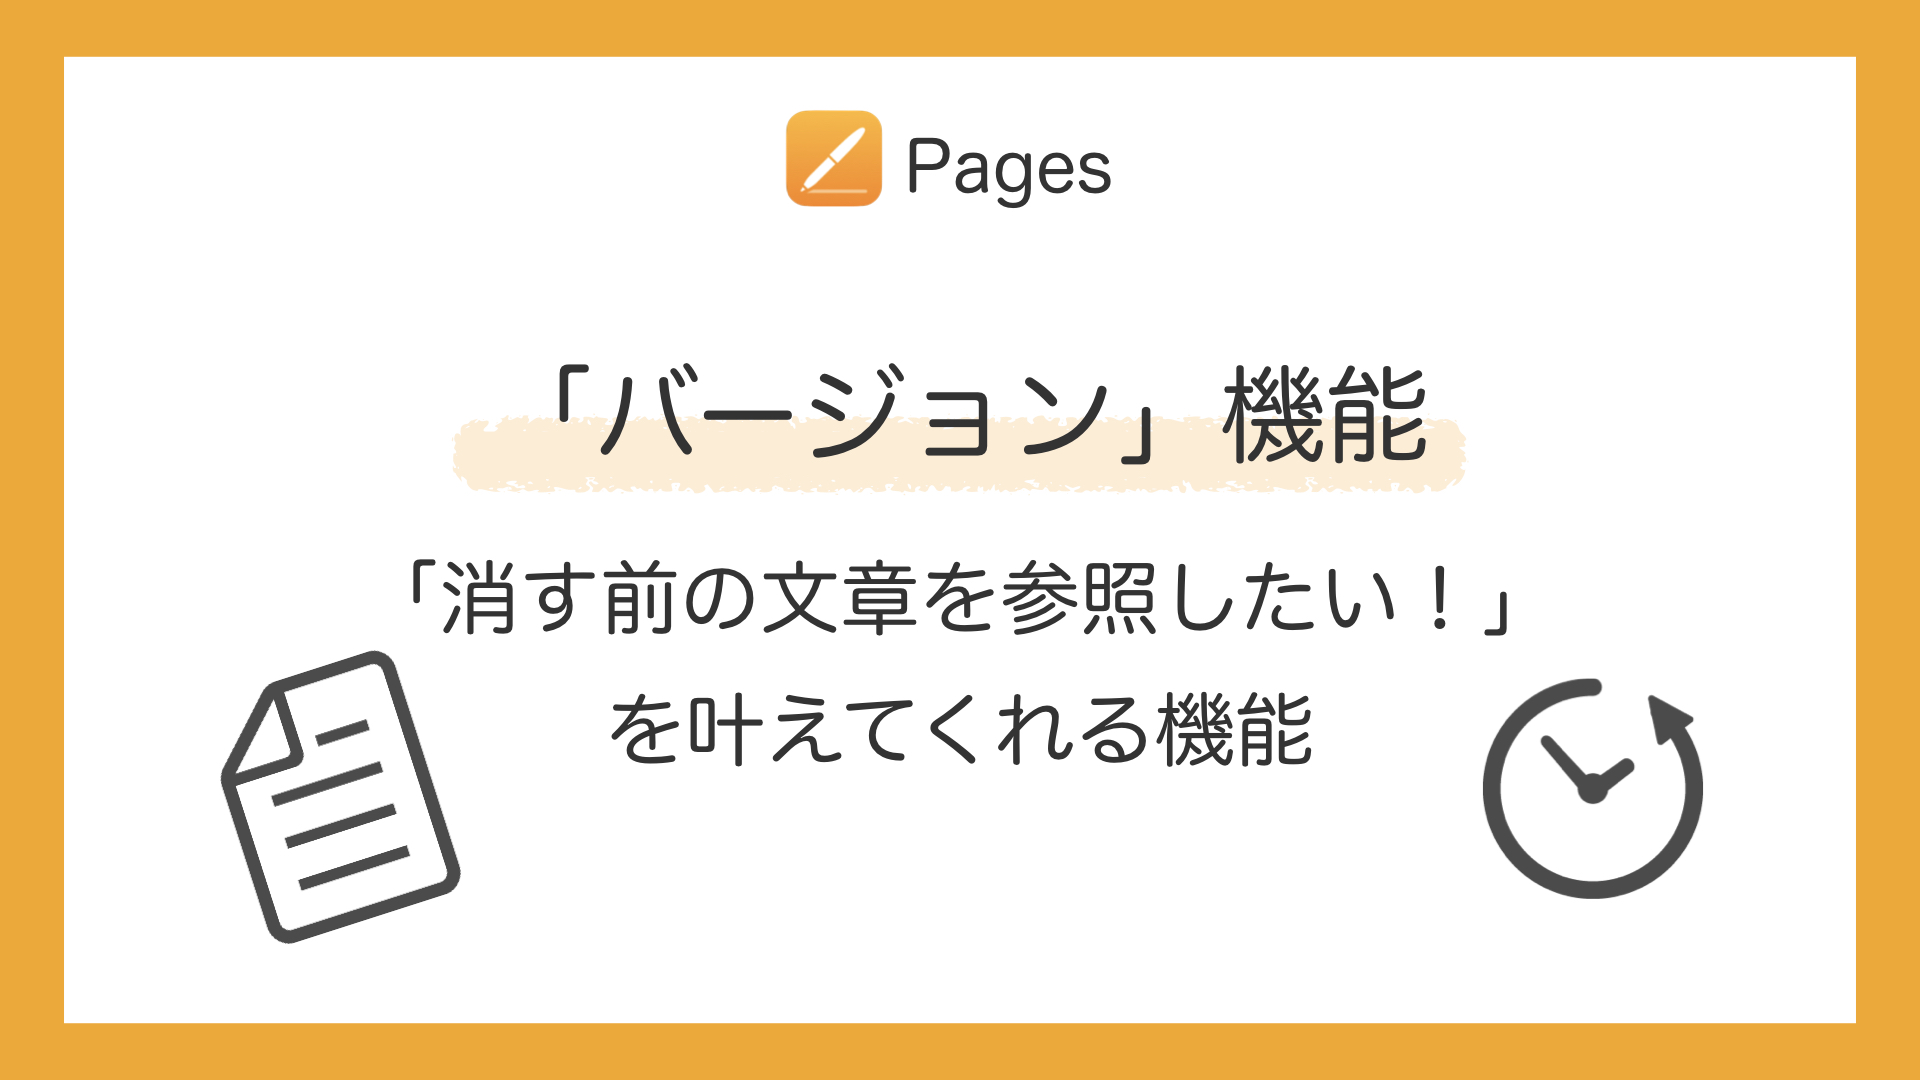 【Pages】書類を自動保存前の状態に戻す方法｜文章の推敲にも使える！